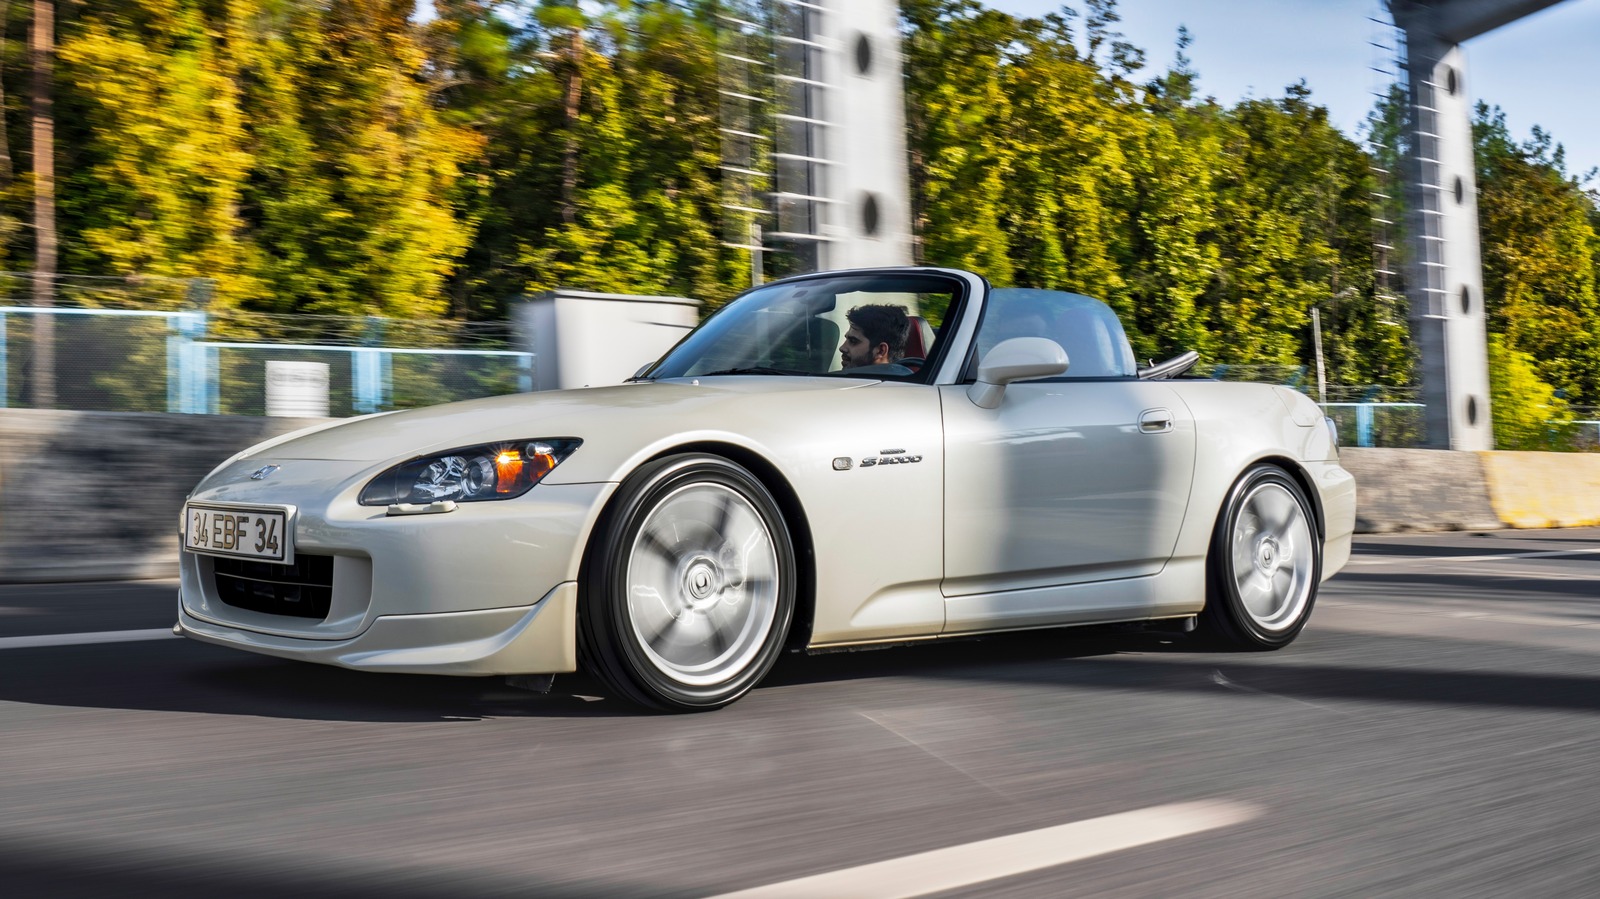 zaad Nederigheid aanvaarden 12 Things You Should Know Before Buying A Honda S2000